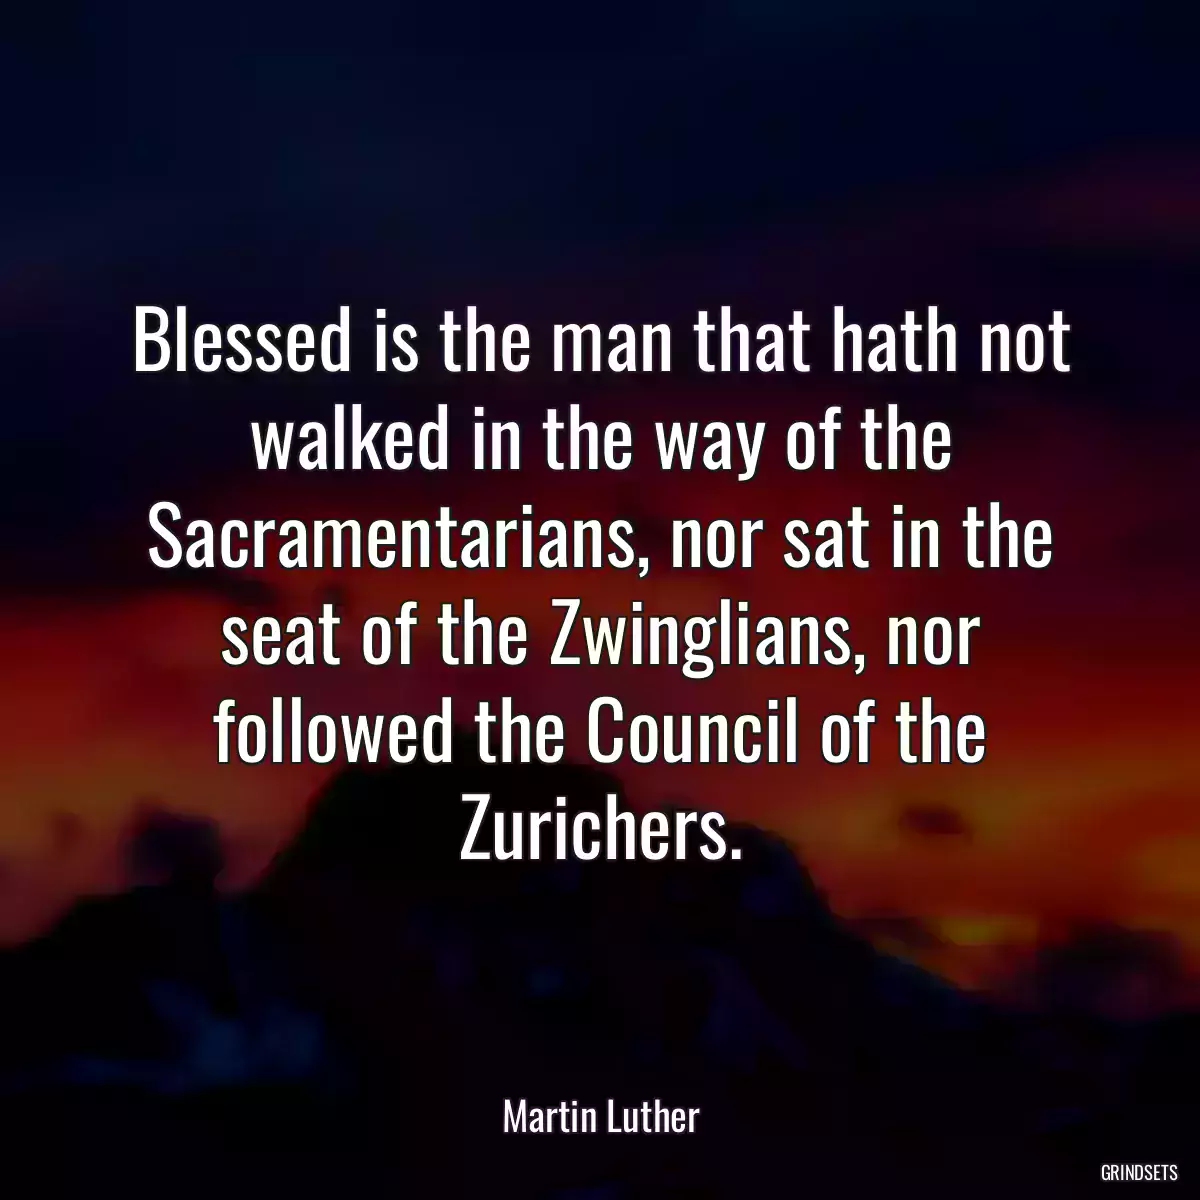 Blessed is the man that hath not walked in the way of the Sacramentarians, nor sat in the seat of the Zwinglians, nor followed the Council of the Zurichers.